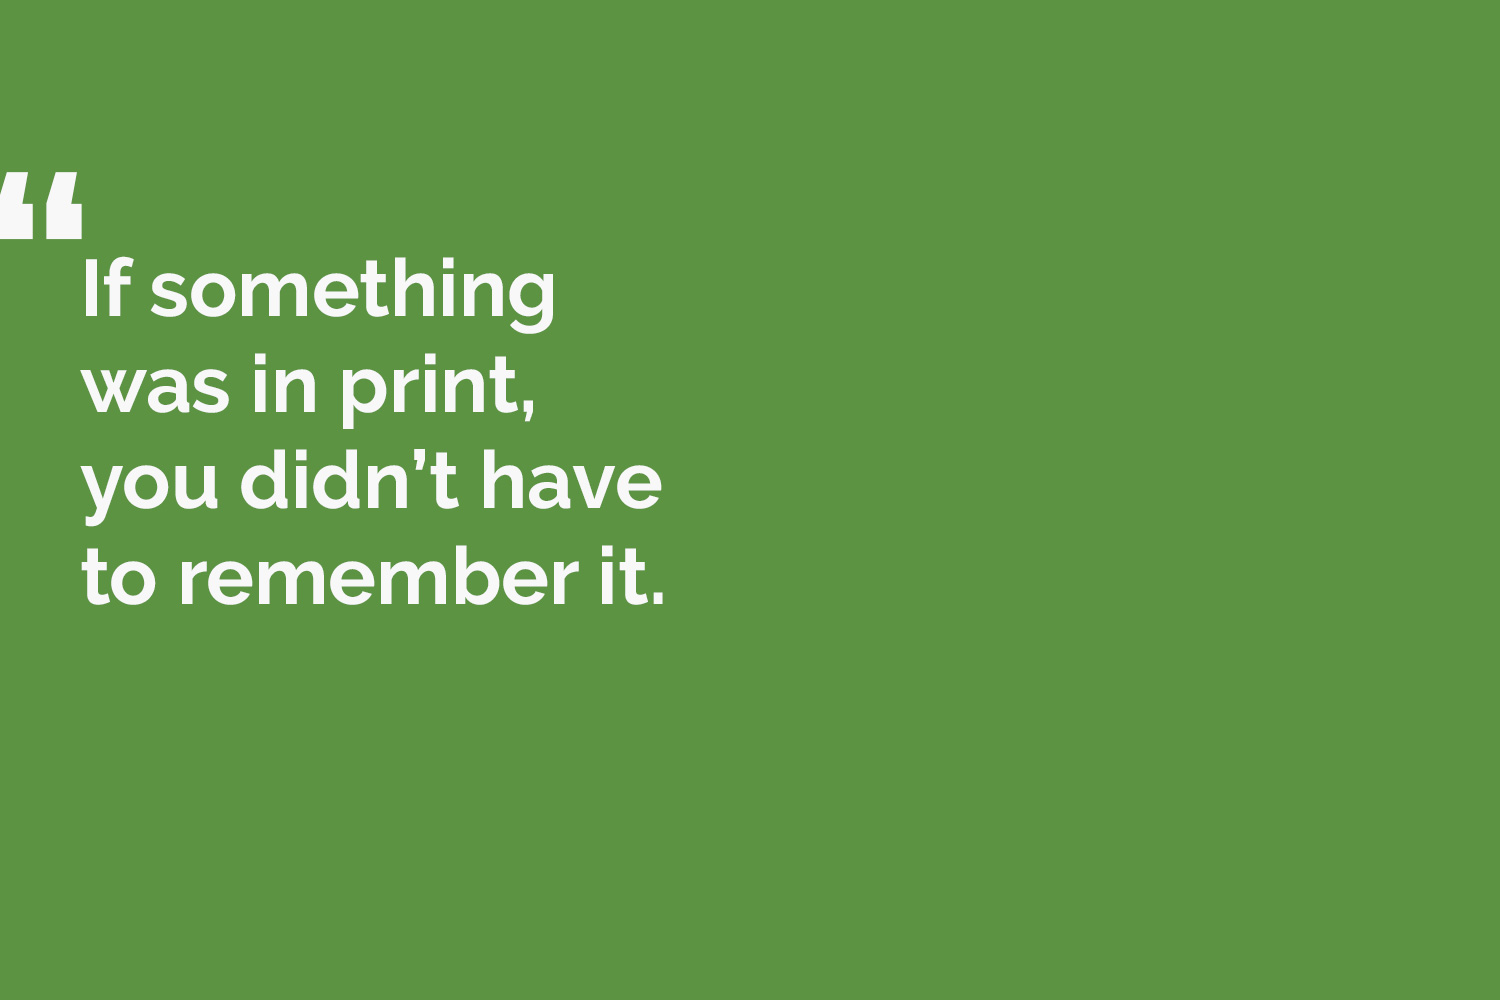 quote card reads: If something was in print, you didn't have to remember it.